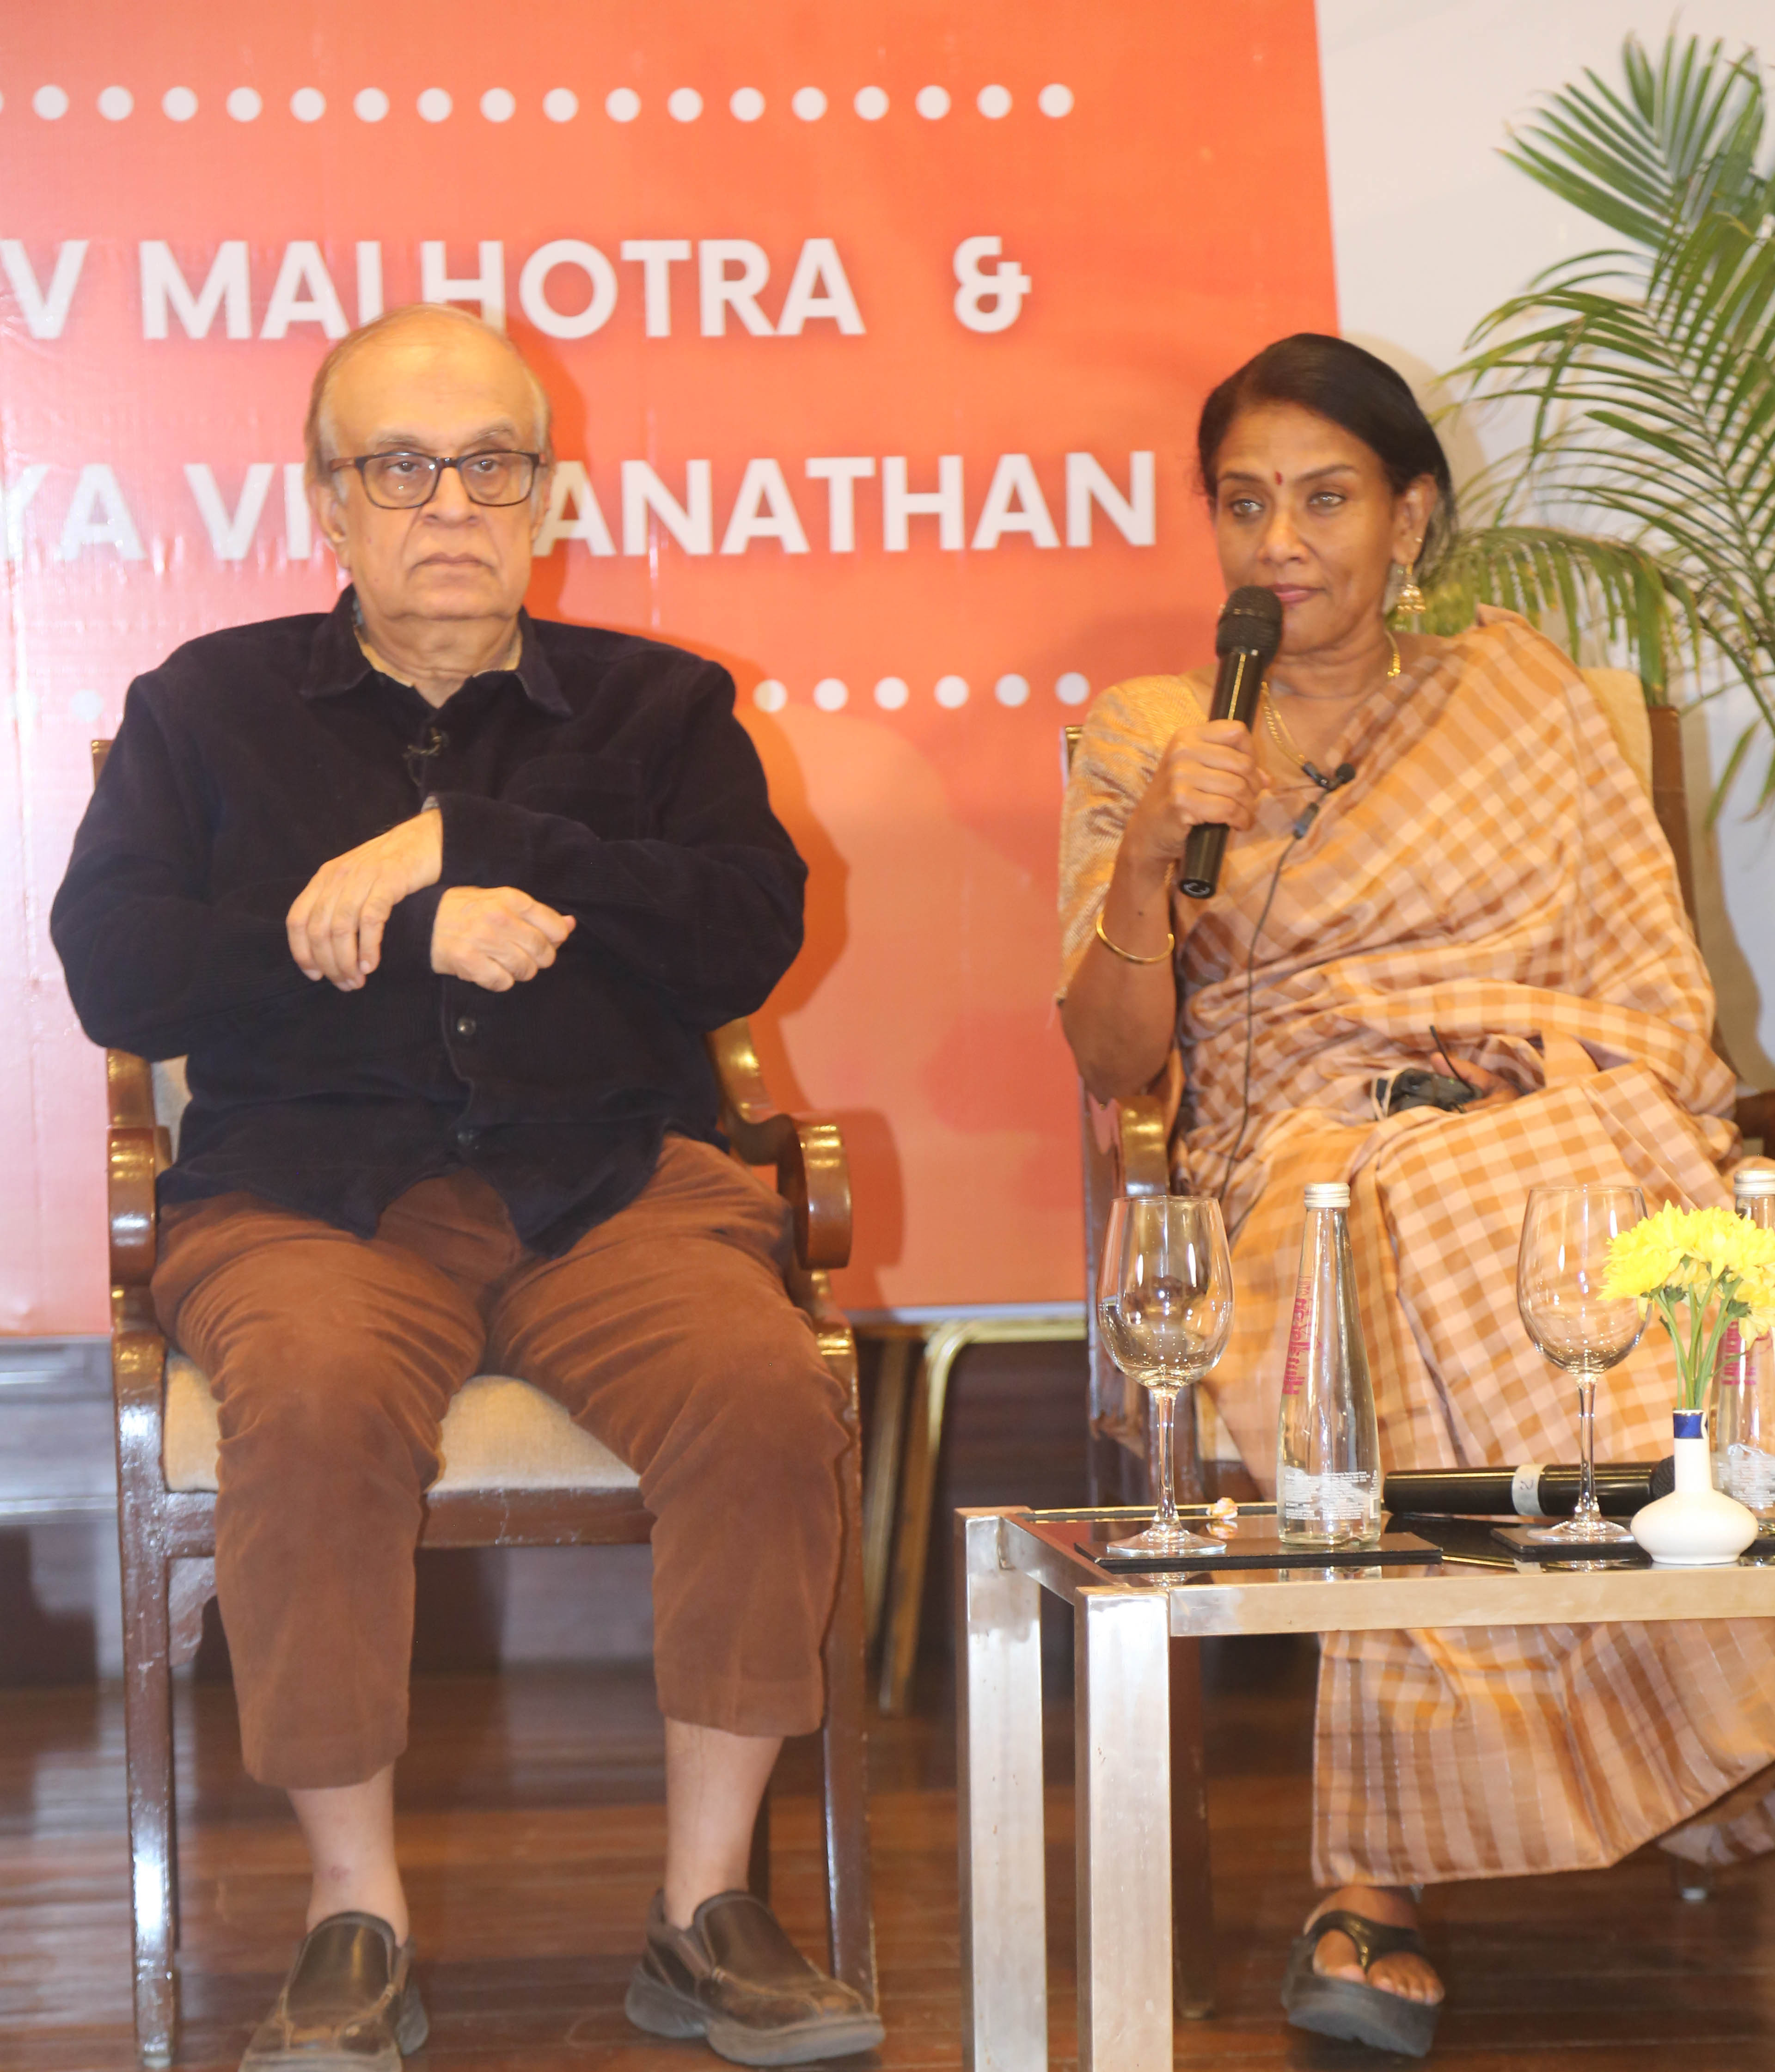 Founder of Infinity Foundation, USA, Sri Rajiv Malhotra; shares insights on challenges faced by India & ways to overcome, with cross section of citizens!